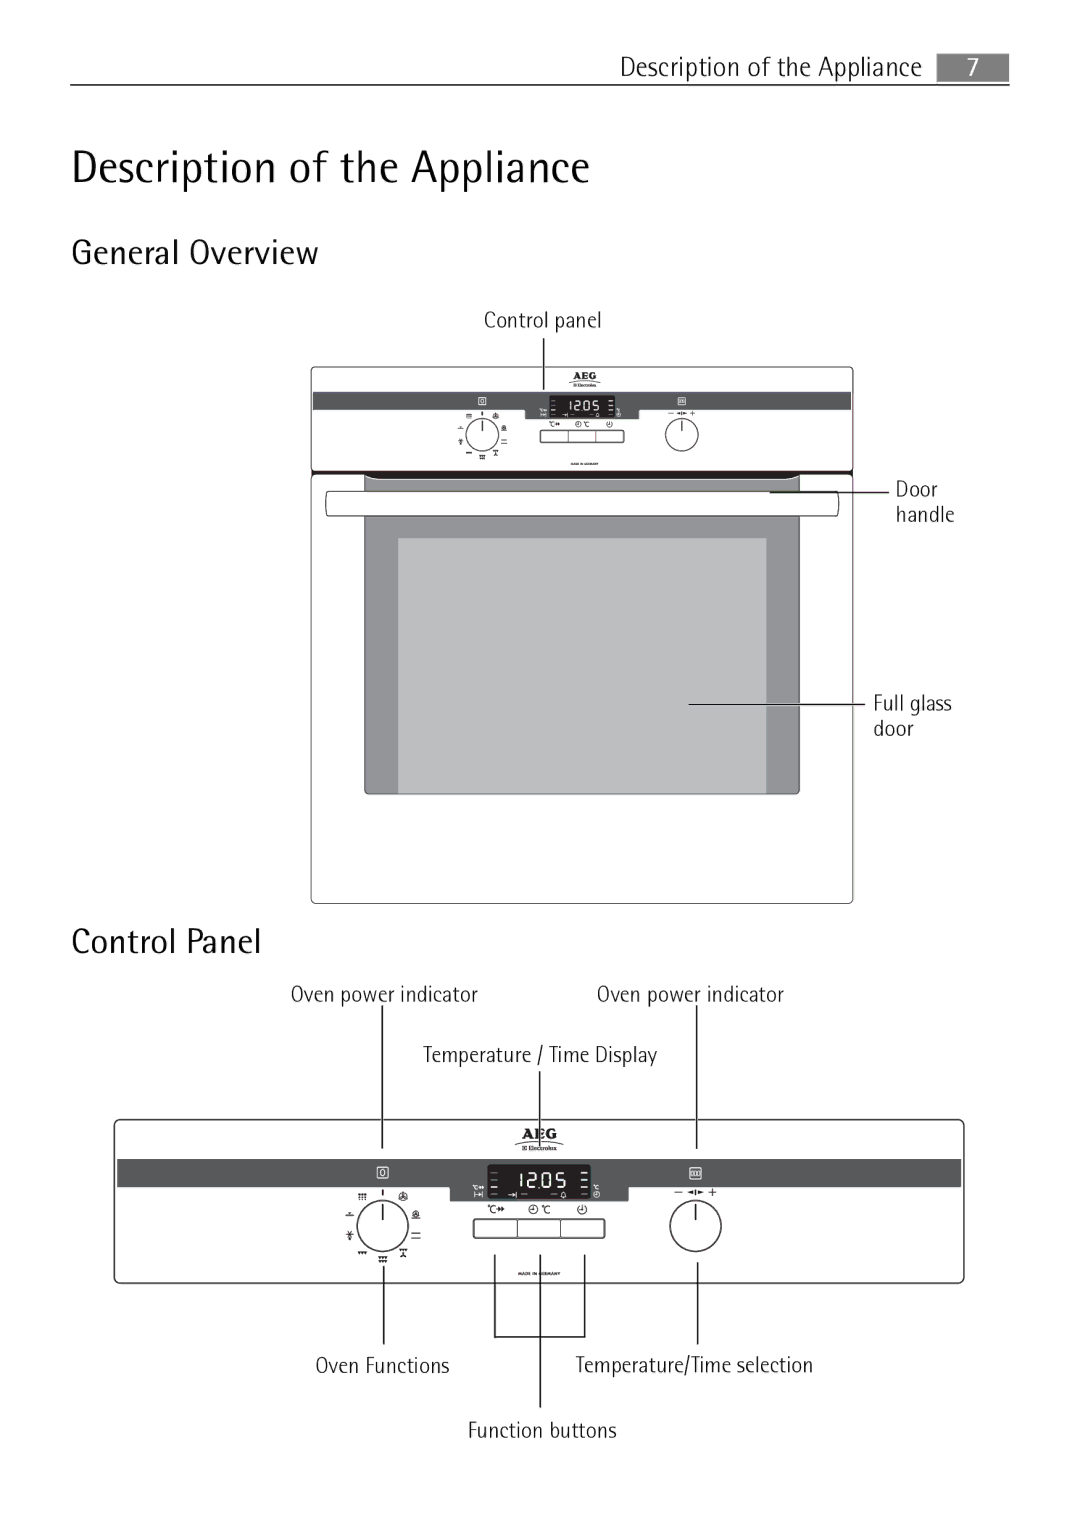 Electrolux B57415A, B57415B user manual Description of the Appliance, General Overview, Control Panel 